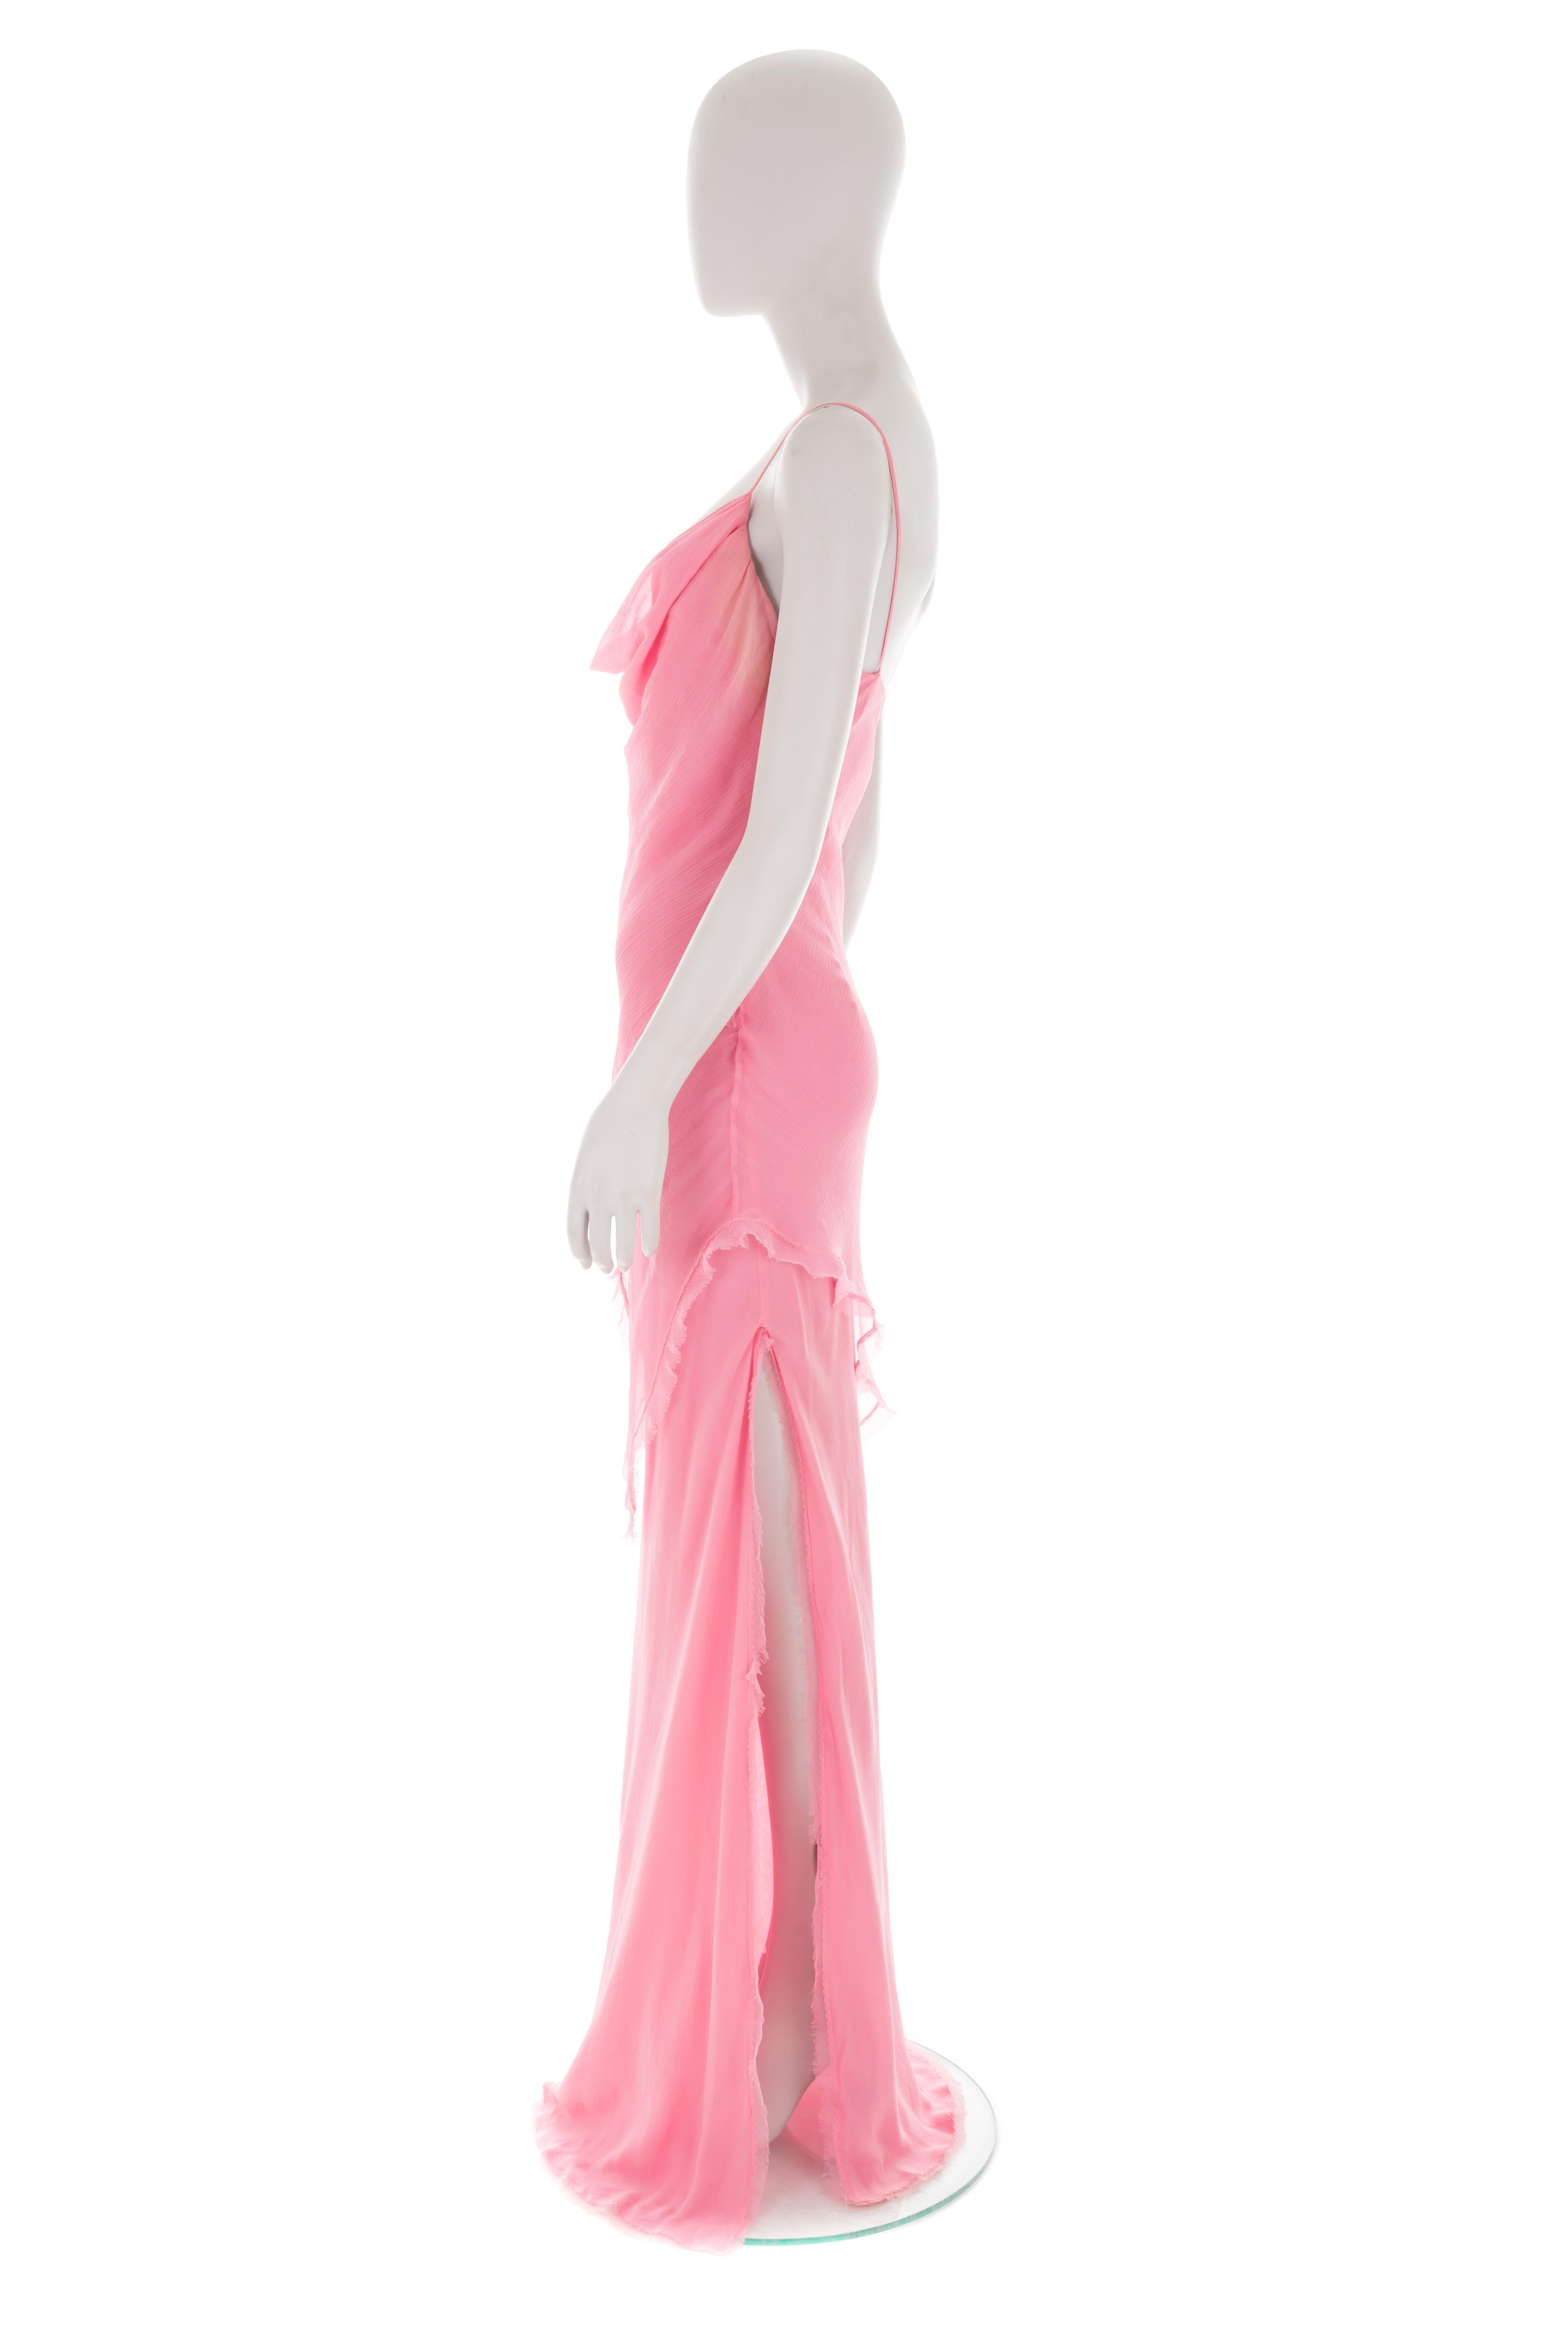 Women's or Men's Ermanno Scervino S/S 2004 multi-layered pink chiffon gown with side slit For Sale